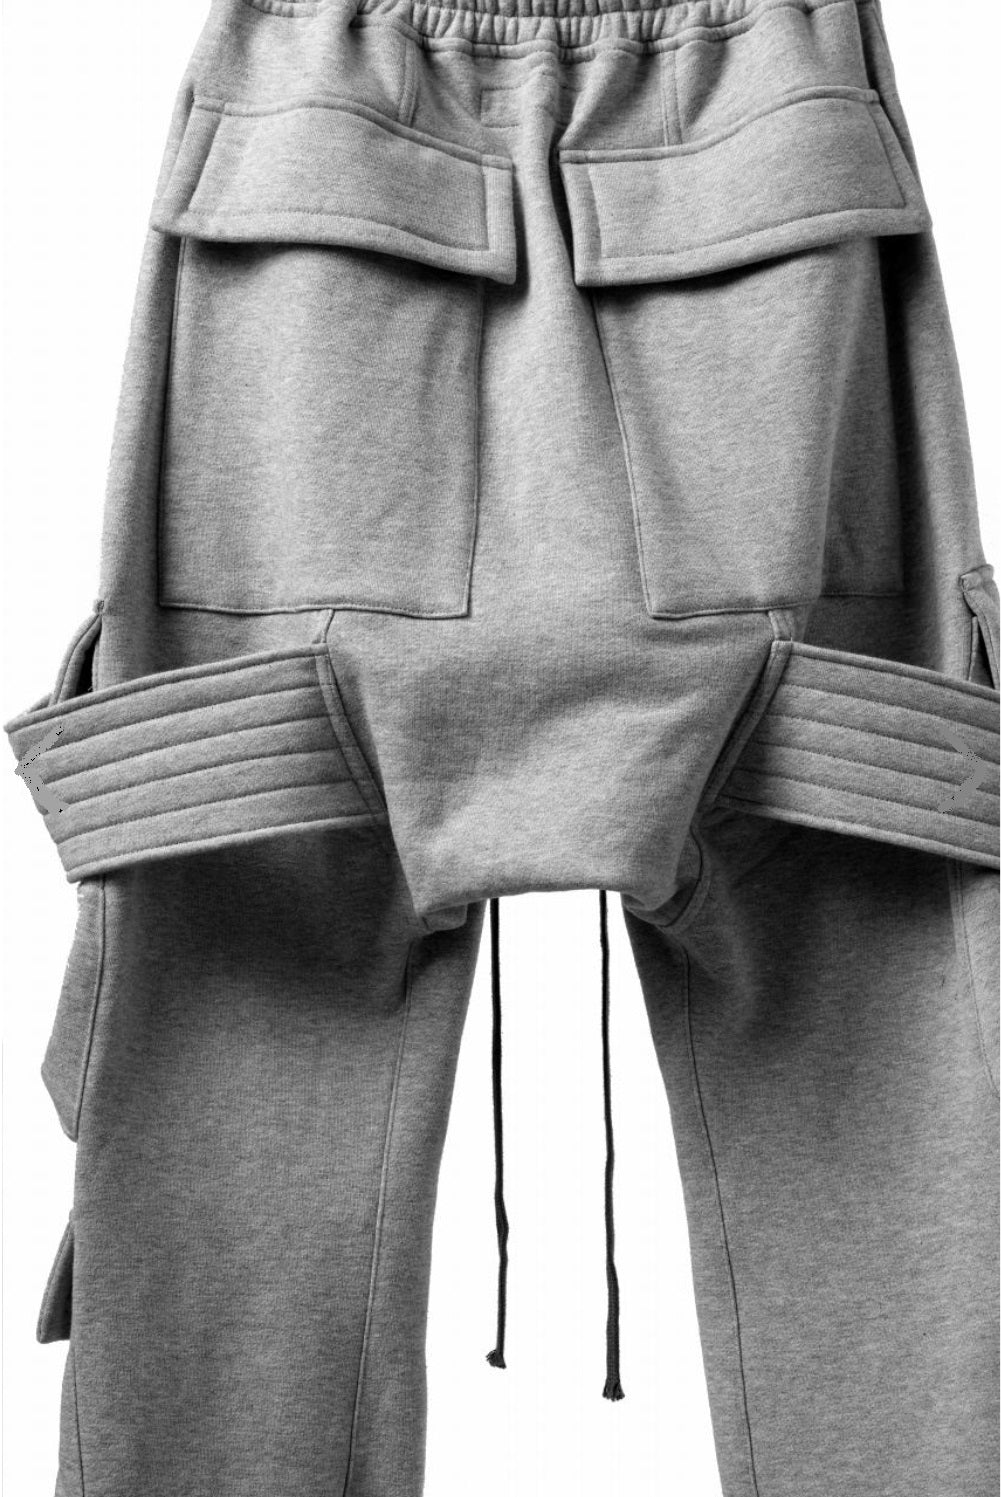 AW Men Relaxed Belted Flap Zip Sarrouel Drop-Crotch Trousers-Cargo Pant